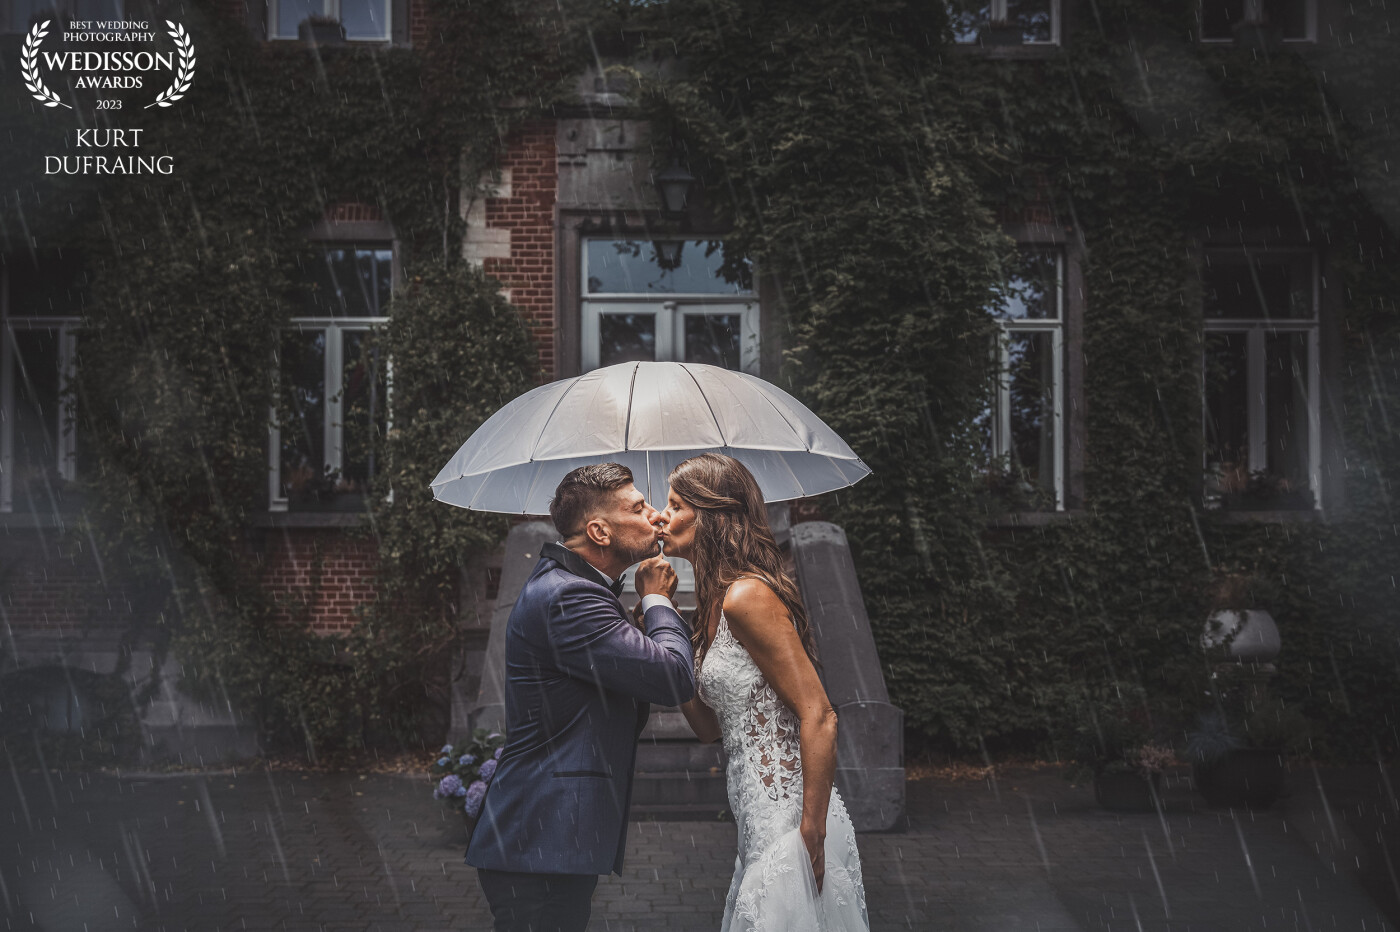 'Purple rain' would be an appropriate song for this photo. Rain can be very beautiful in a photo, especially if the couple continues to shine!